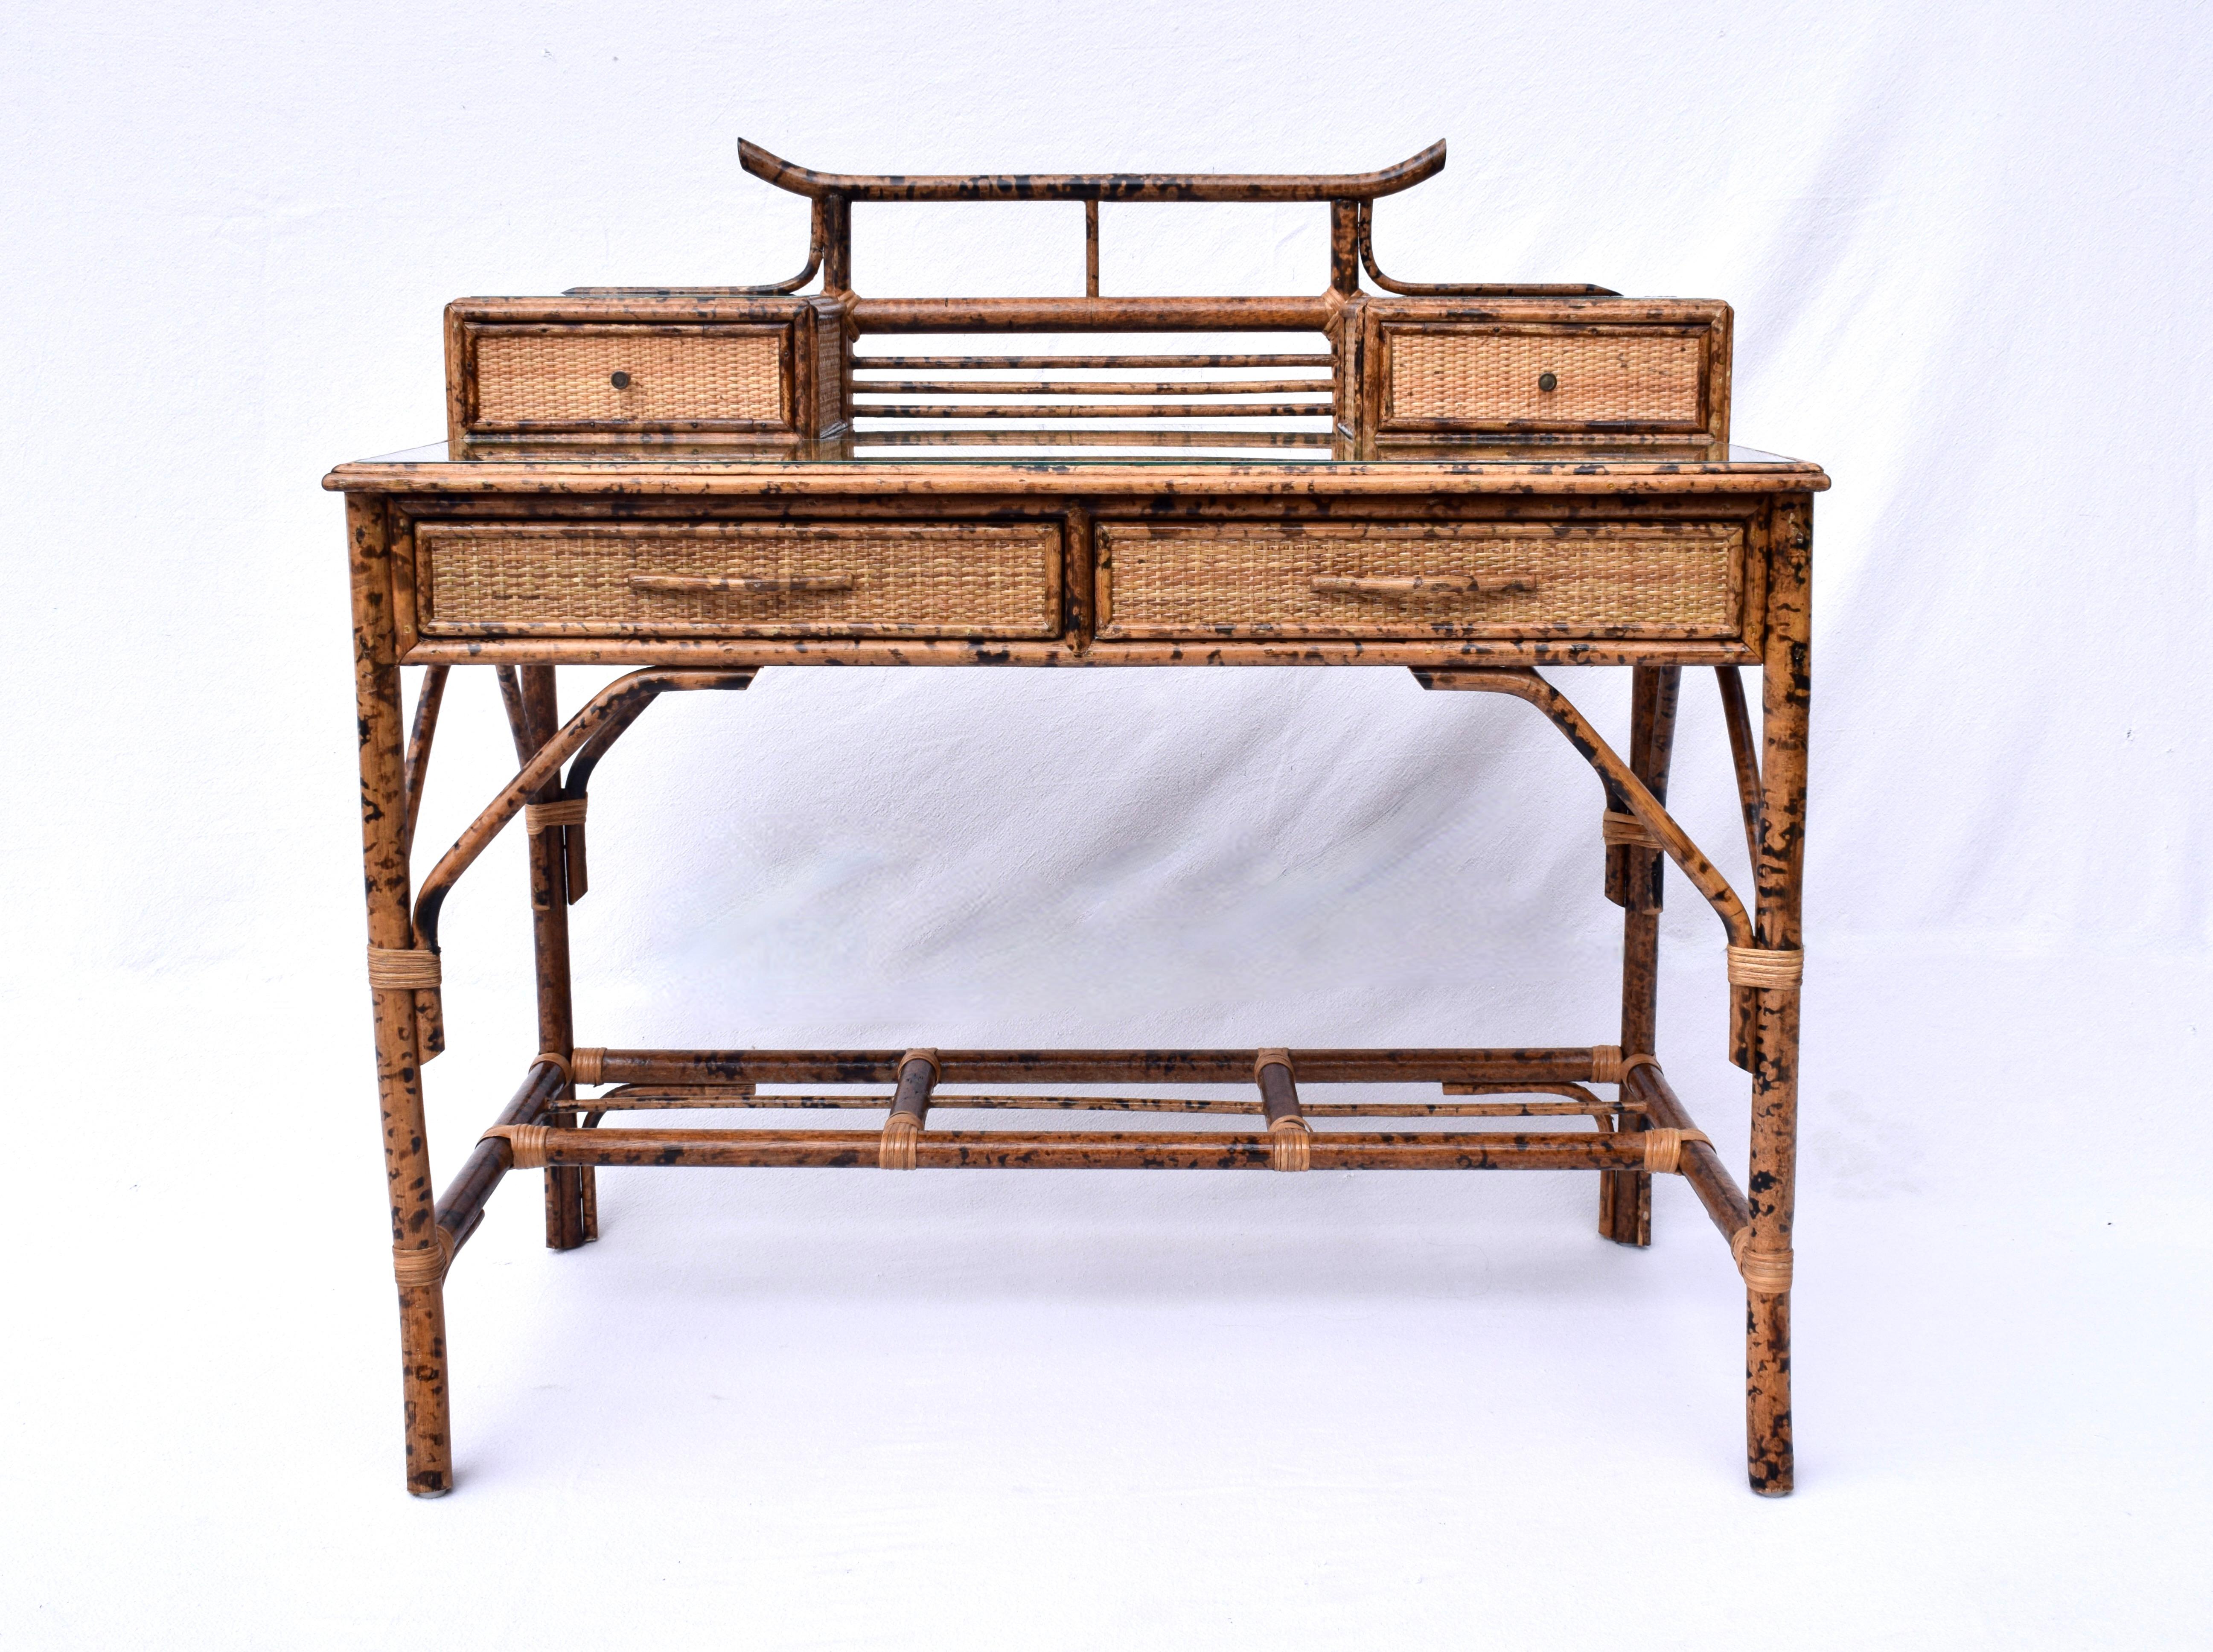 Midcentury burnt tortoise bamboo and grass cloth desk with British Colonial design elements featuring two glove boxes, two drawers, elegant splay front legs and matching caned seat chair. Includes new custom Cowtan and Tout Chinoiserie toile Chintz